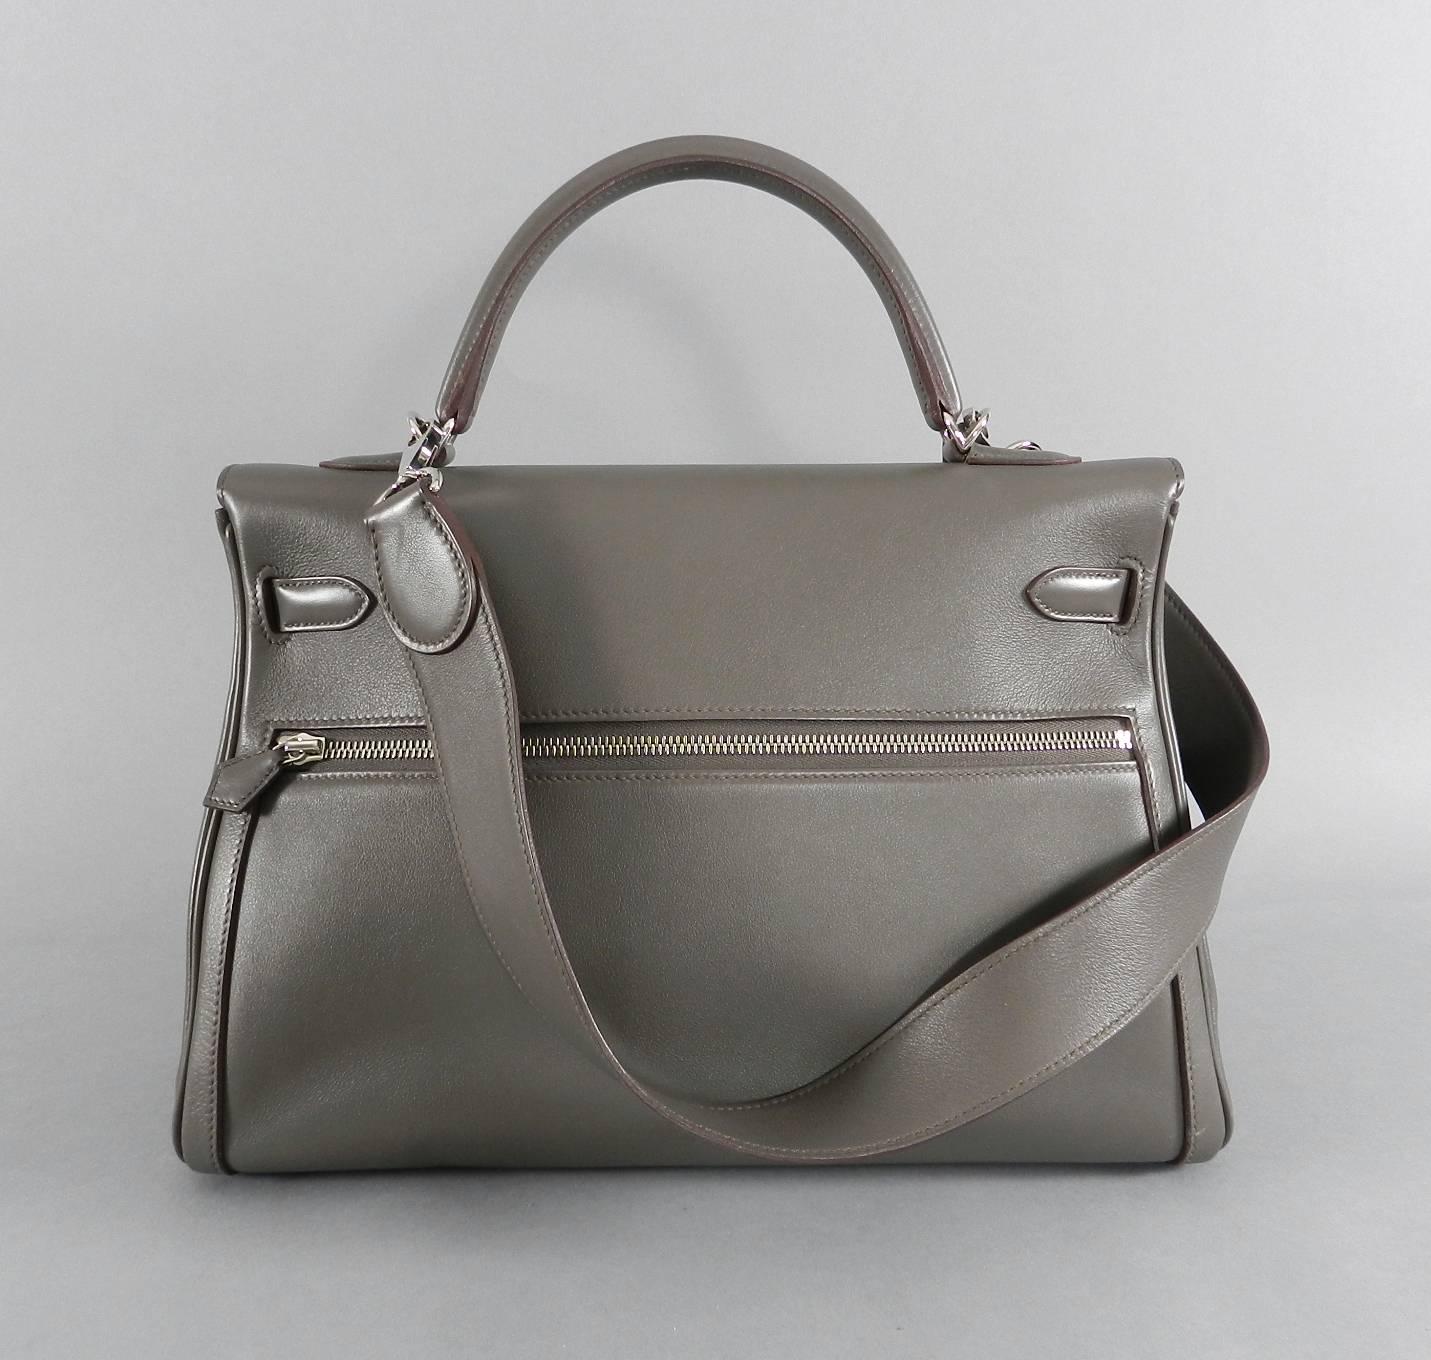 Hermes Kelly Lakis 35cm bag in Etain Swift leather with Palladium Hardware.  Excellent pre-owned condition. Please view all photos.  Metal hardware is excellent, corners are excellent. Date stamp P in square for year 2012.  100% authentic. Includes